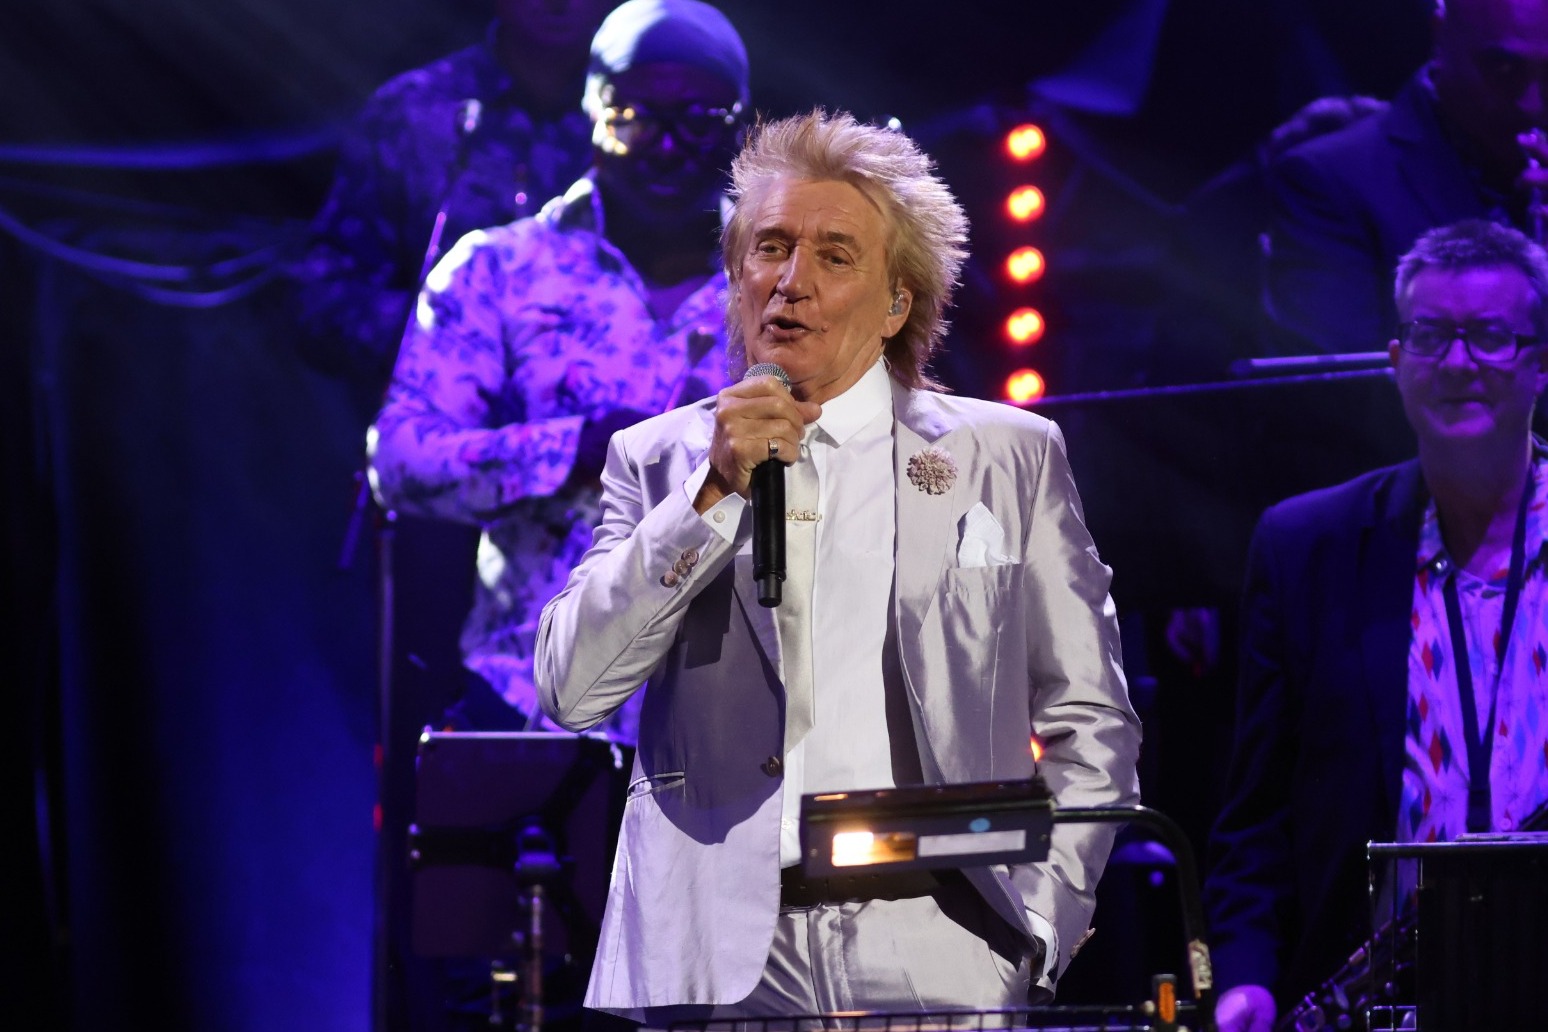 Rod Stewart and Van Morrison ‘raise the roof’ at prostate cancer charity concert 